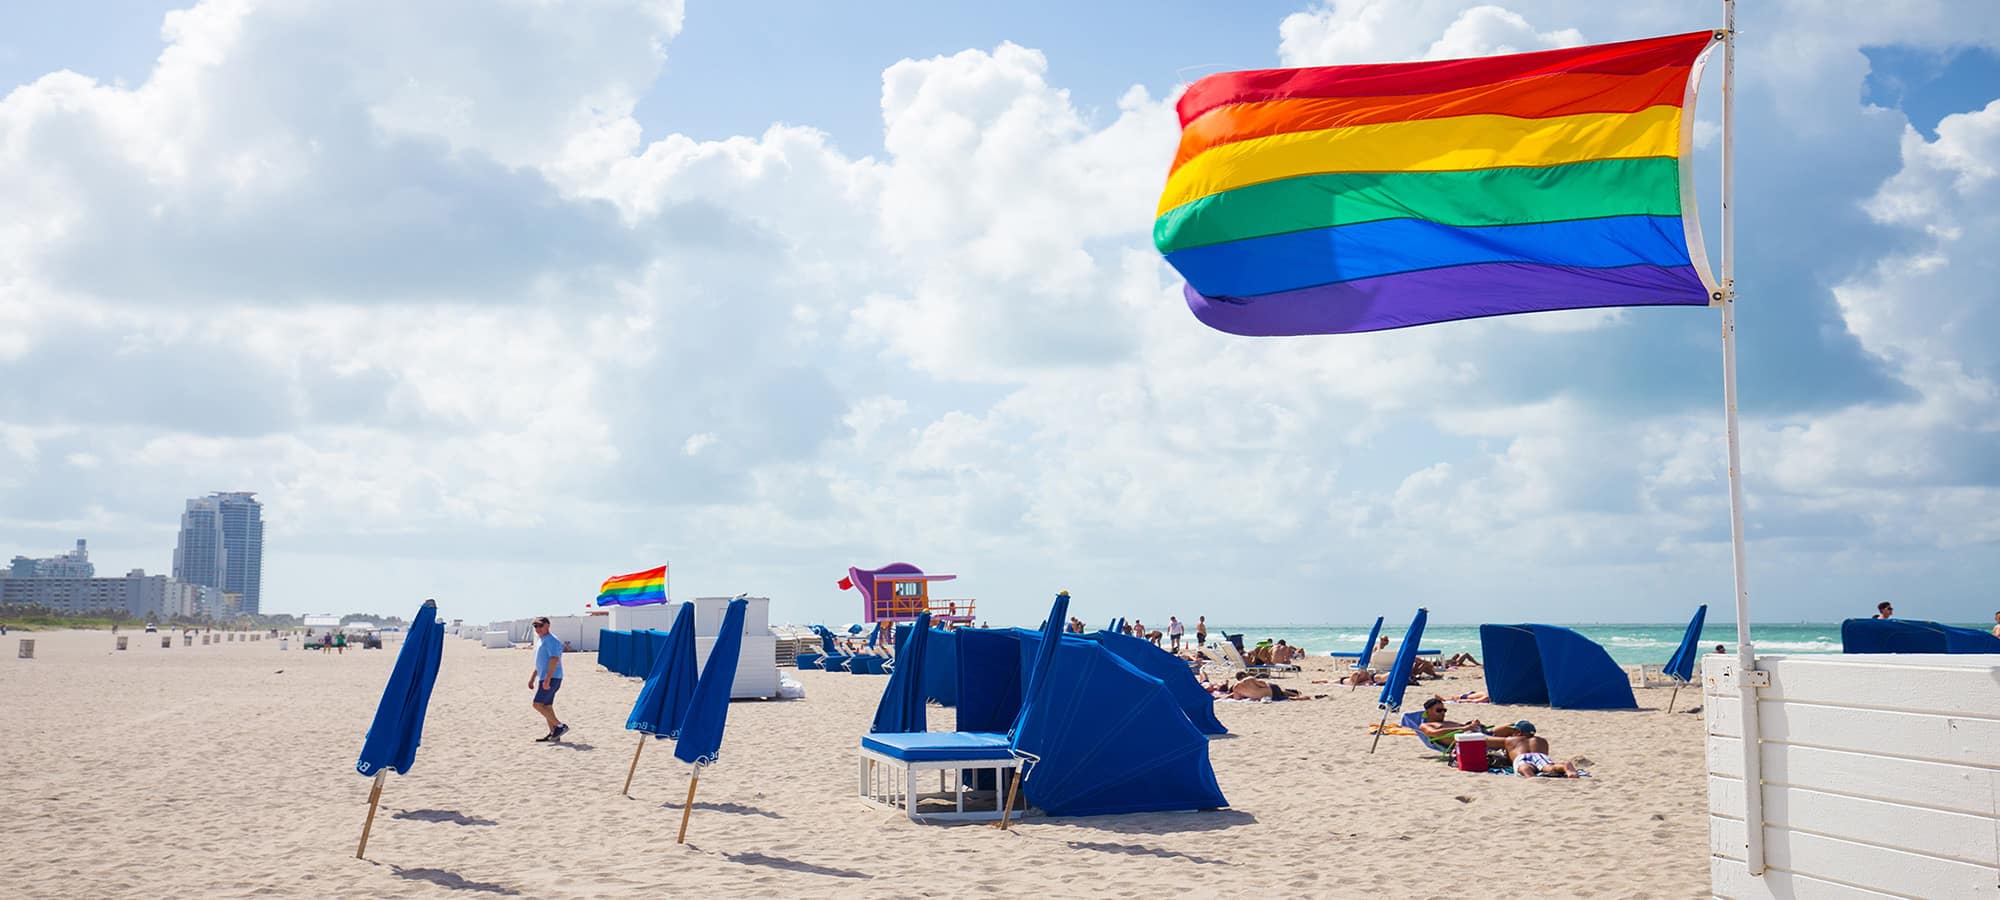 If you seek sun, sand and diversity, head to any one of these 15 gay-friendly islands.